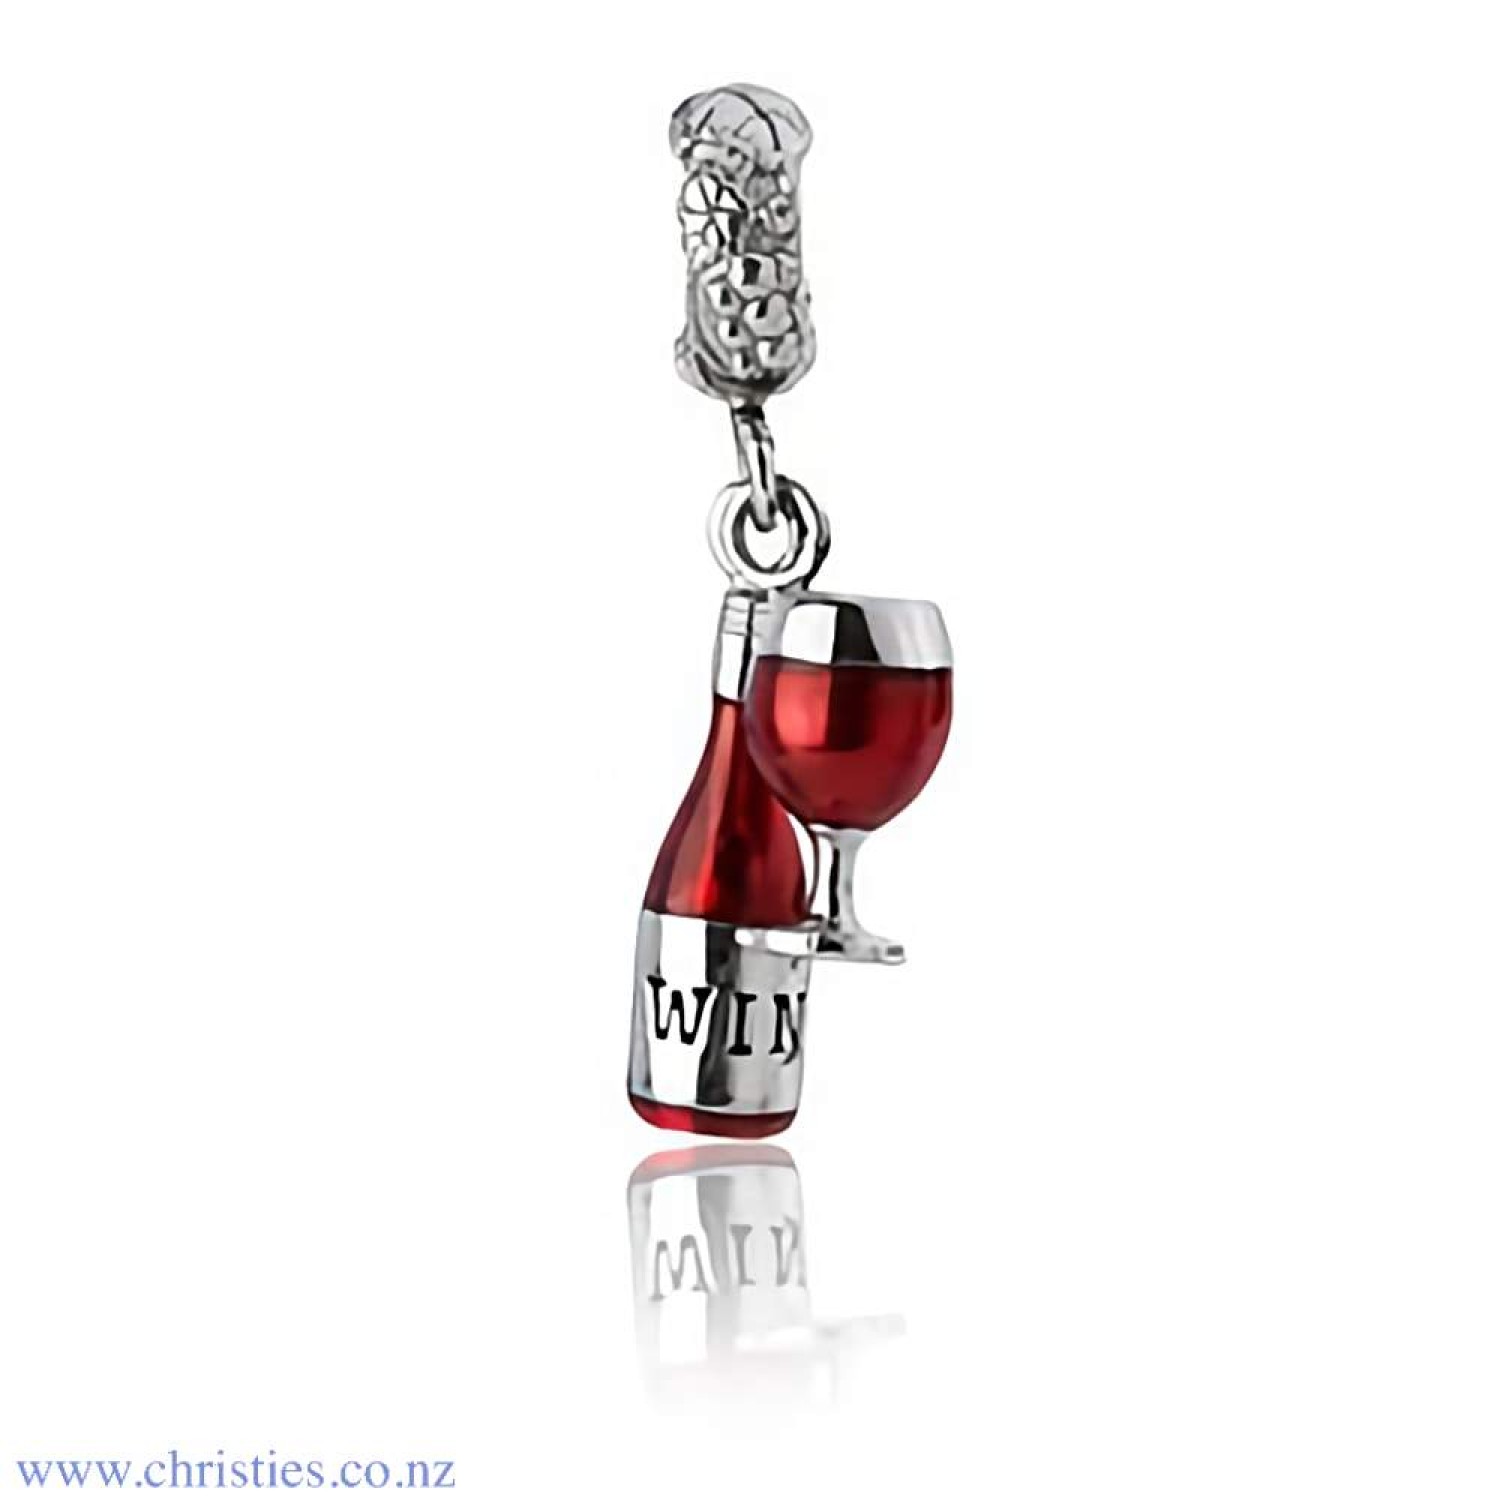 LKD047 Evolve Jewellery NZ Wine Charm. Famous for it’s grape-growing climate, New Zealand is home to the world’s best wines. Our NZ Wine charm pays homage to the diverse regions spanning from Northland to Central Otago. Featuring silver and enamel, this c